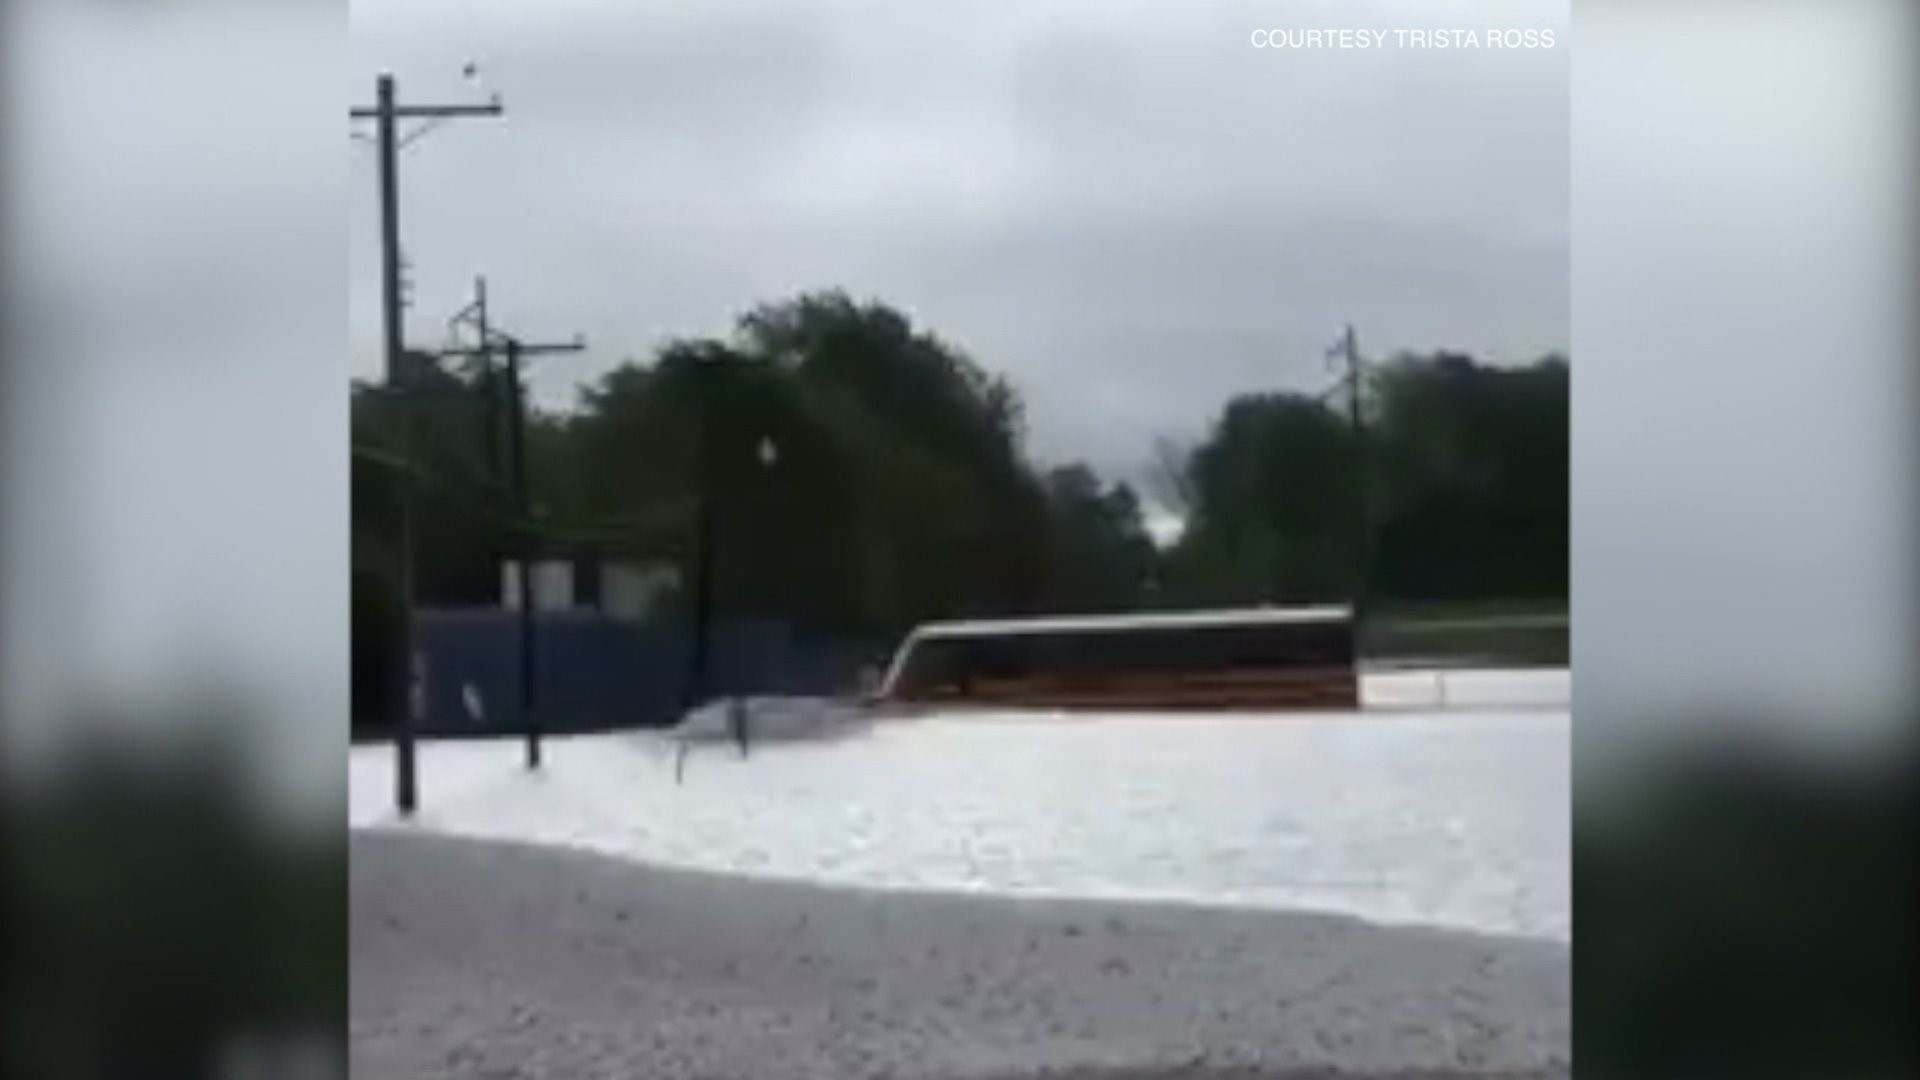 Bus plows through floodwaters